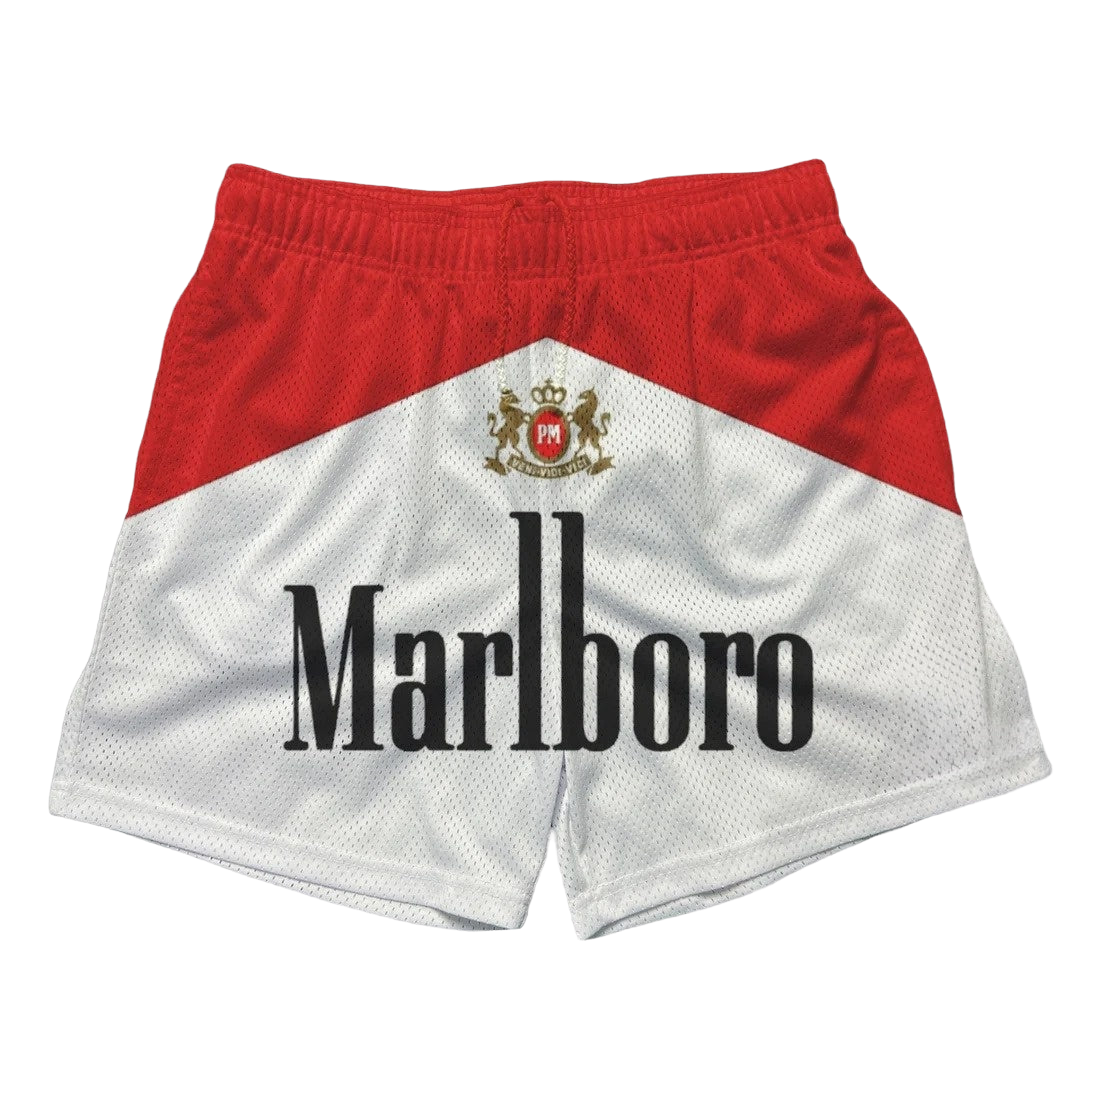 a red and white shorts with the word marlboro printed on it